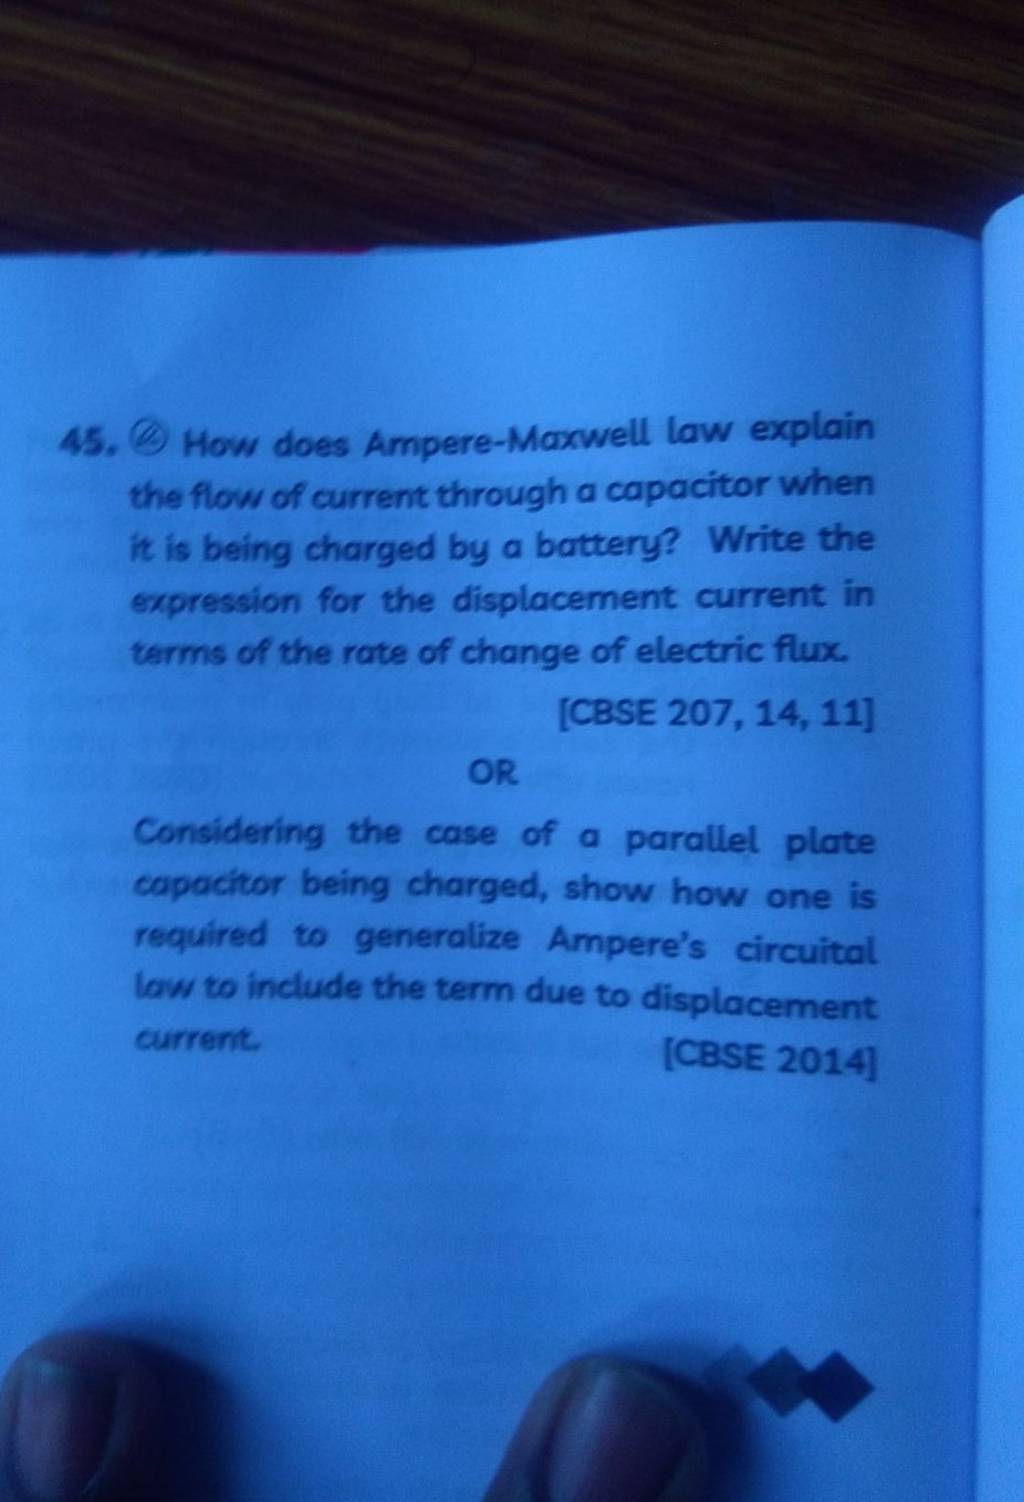 45. (a) How does Ampere-Maxwell law explain the flow of current throug